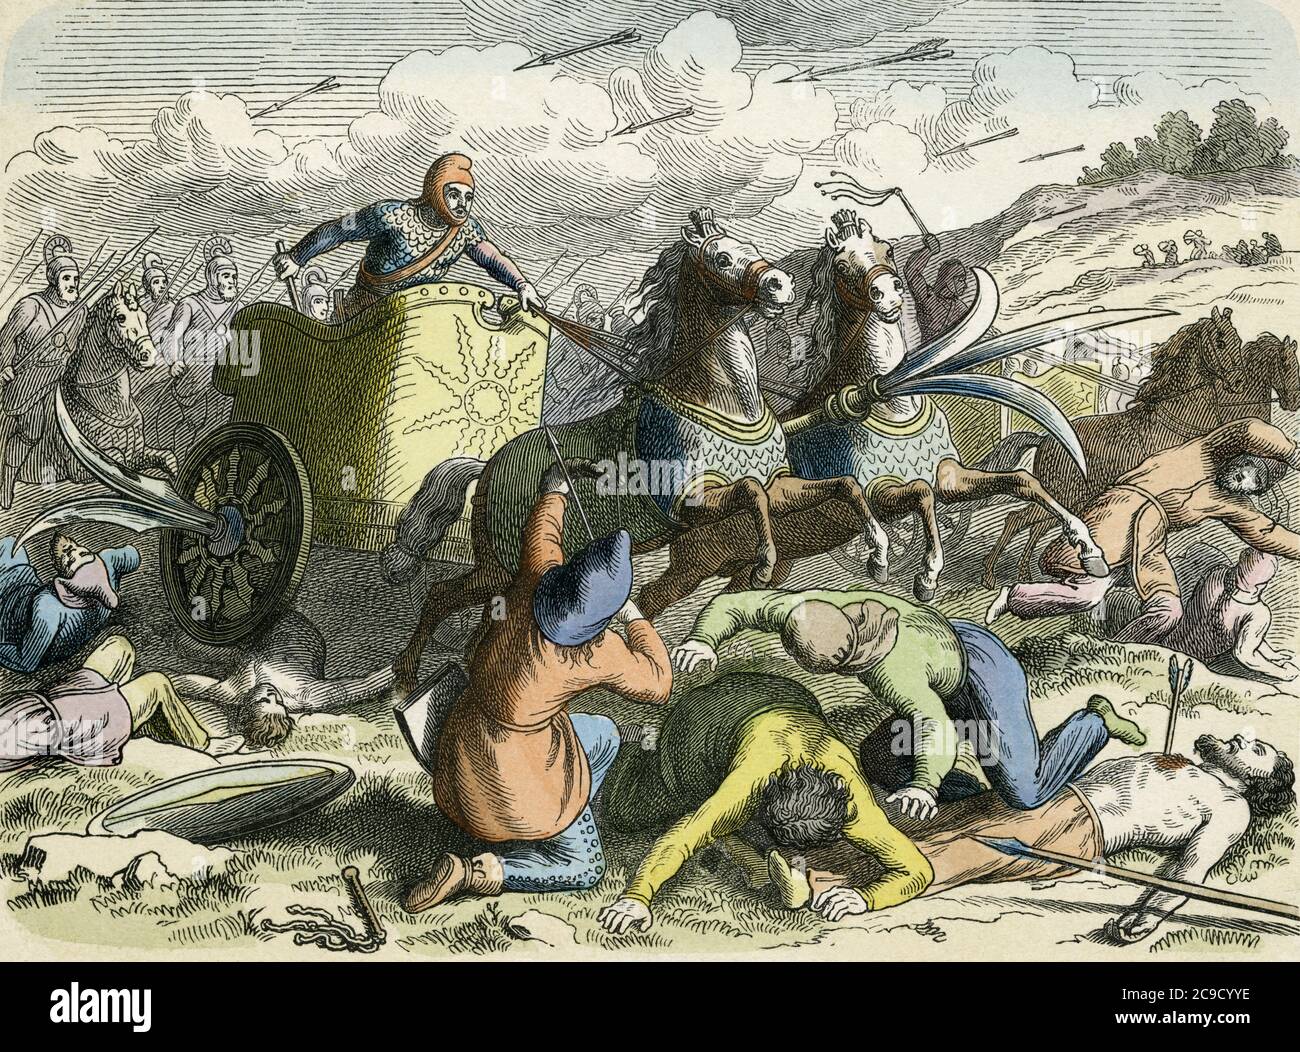 Scythed chariot in battle.  Scholars believe scythed chariots were first used around the mid-5th century BC. After a 19th century work by German artist Heinrich Leutemann. Stock Photo